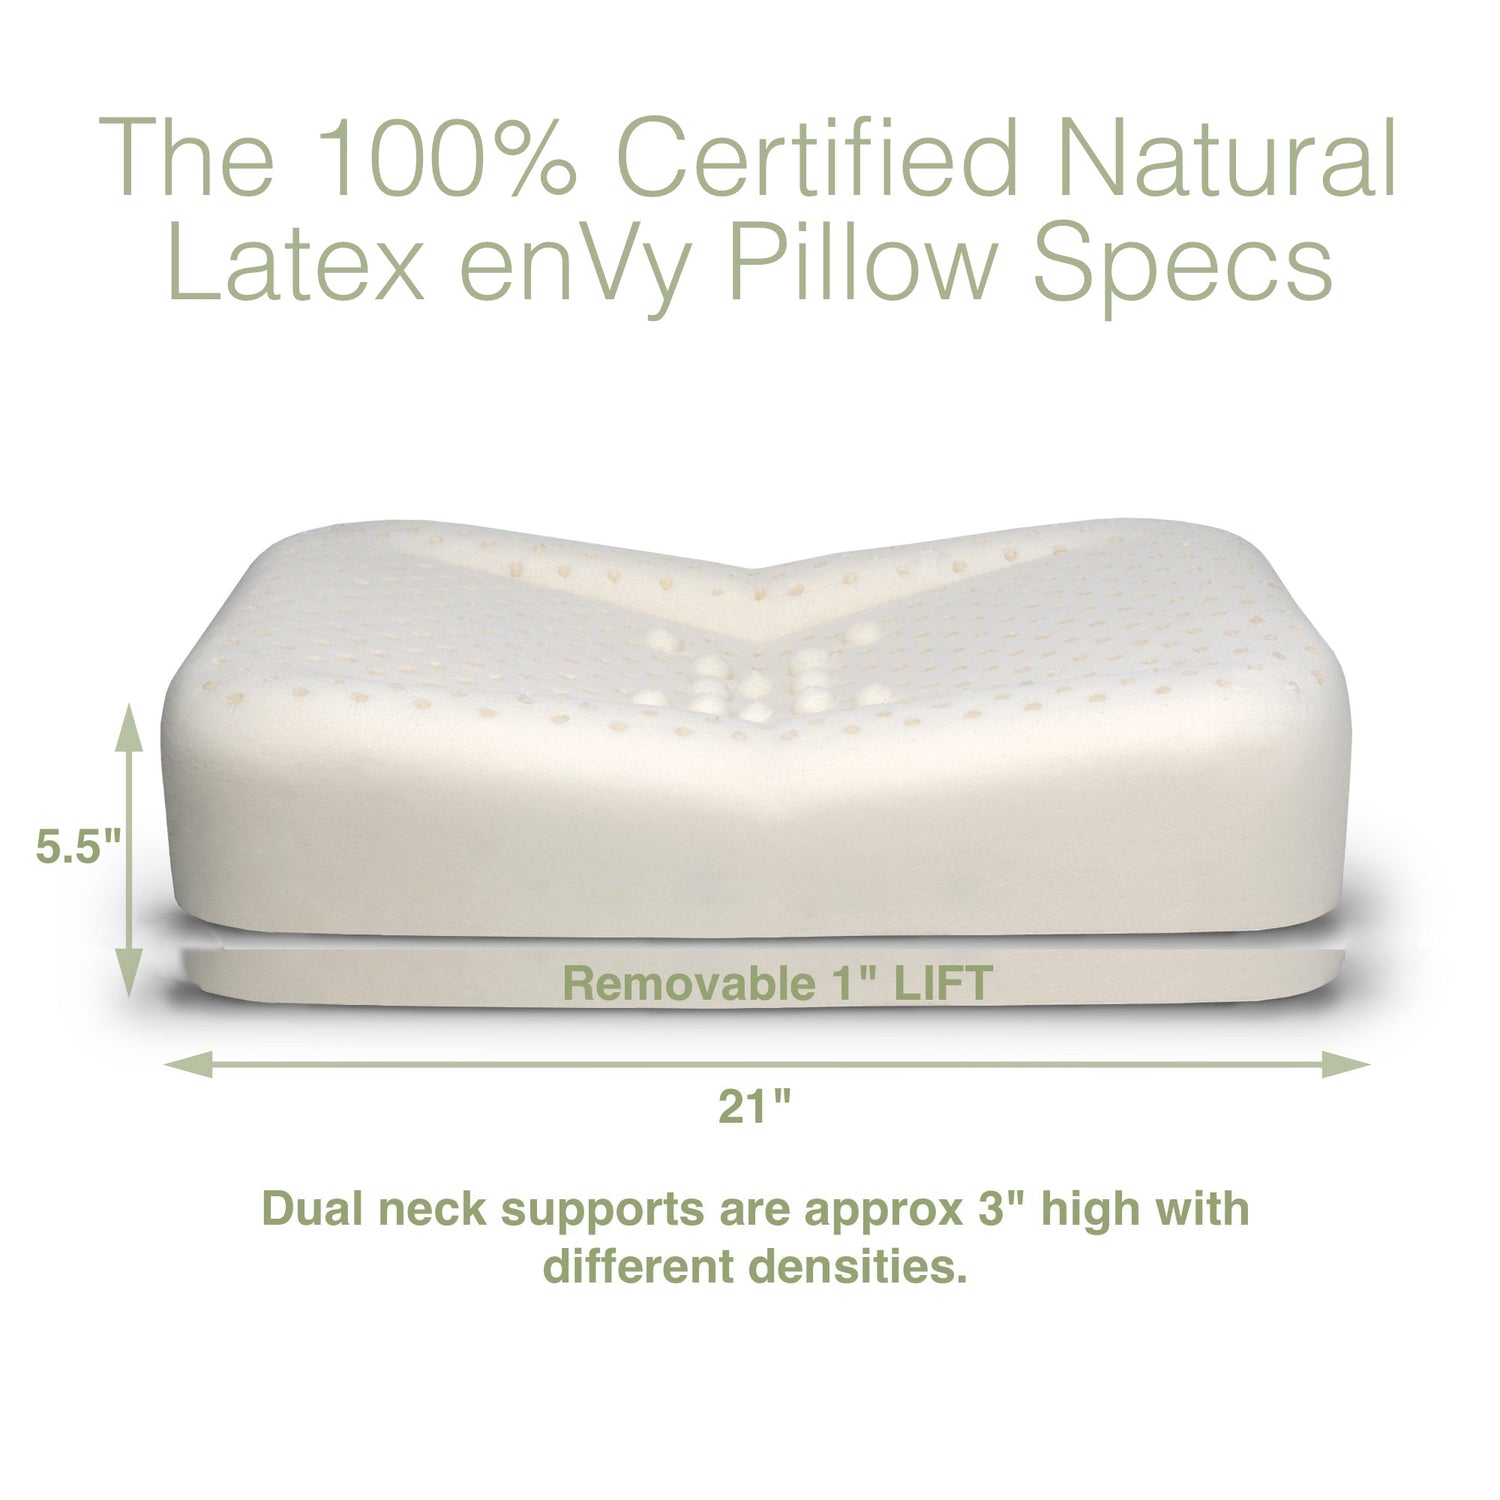 enVy® RX 100% Natural Latex PROACTIVE-Aging Pillow with Botanical TENCEL™ Pillowcase - enVy Pillow